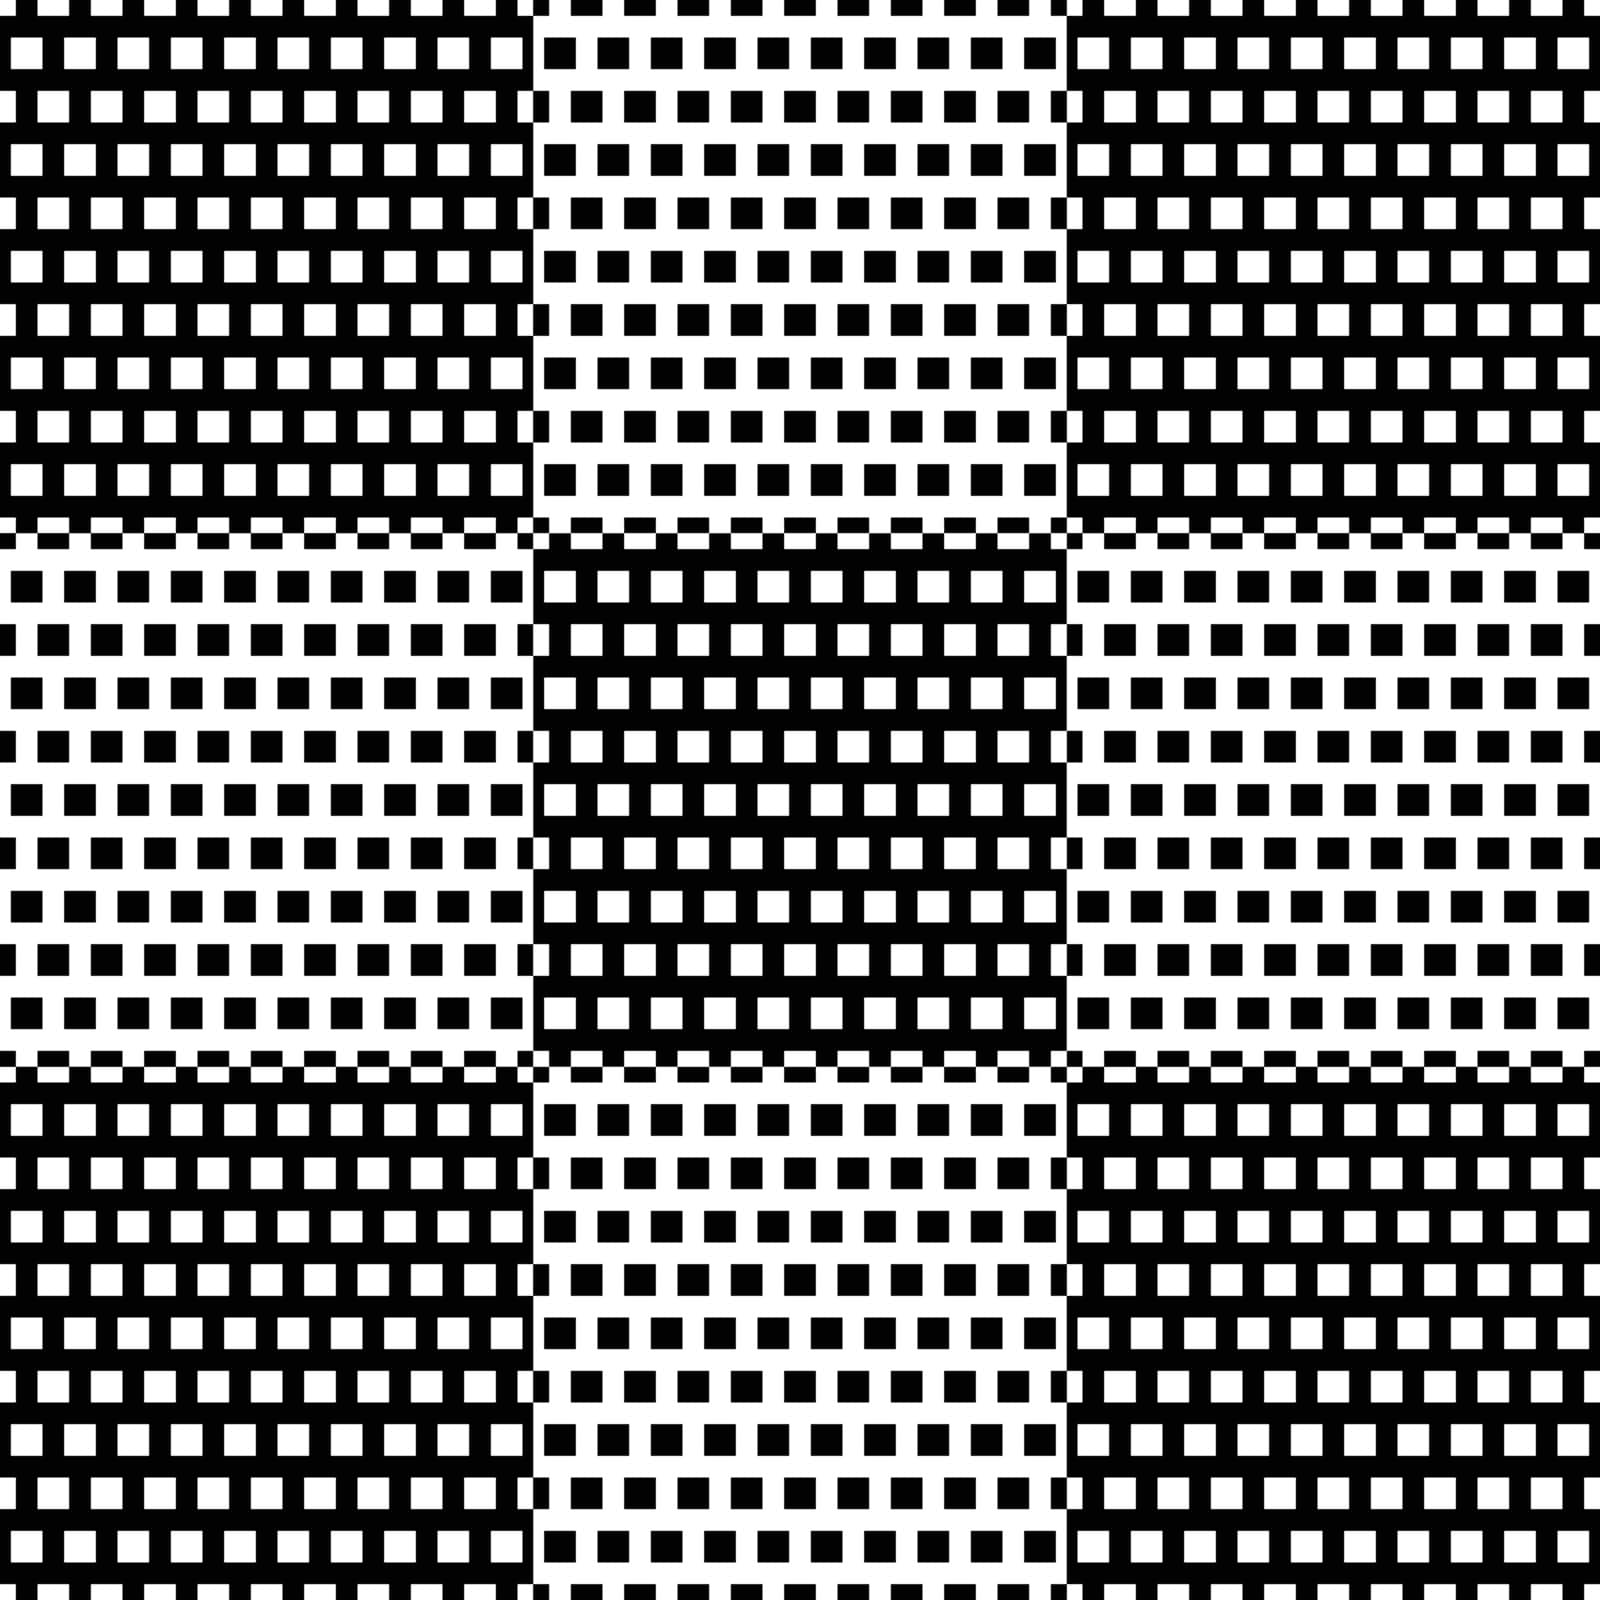 Black and white checkered pattern with square pattern by 3dvector